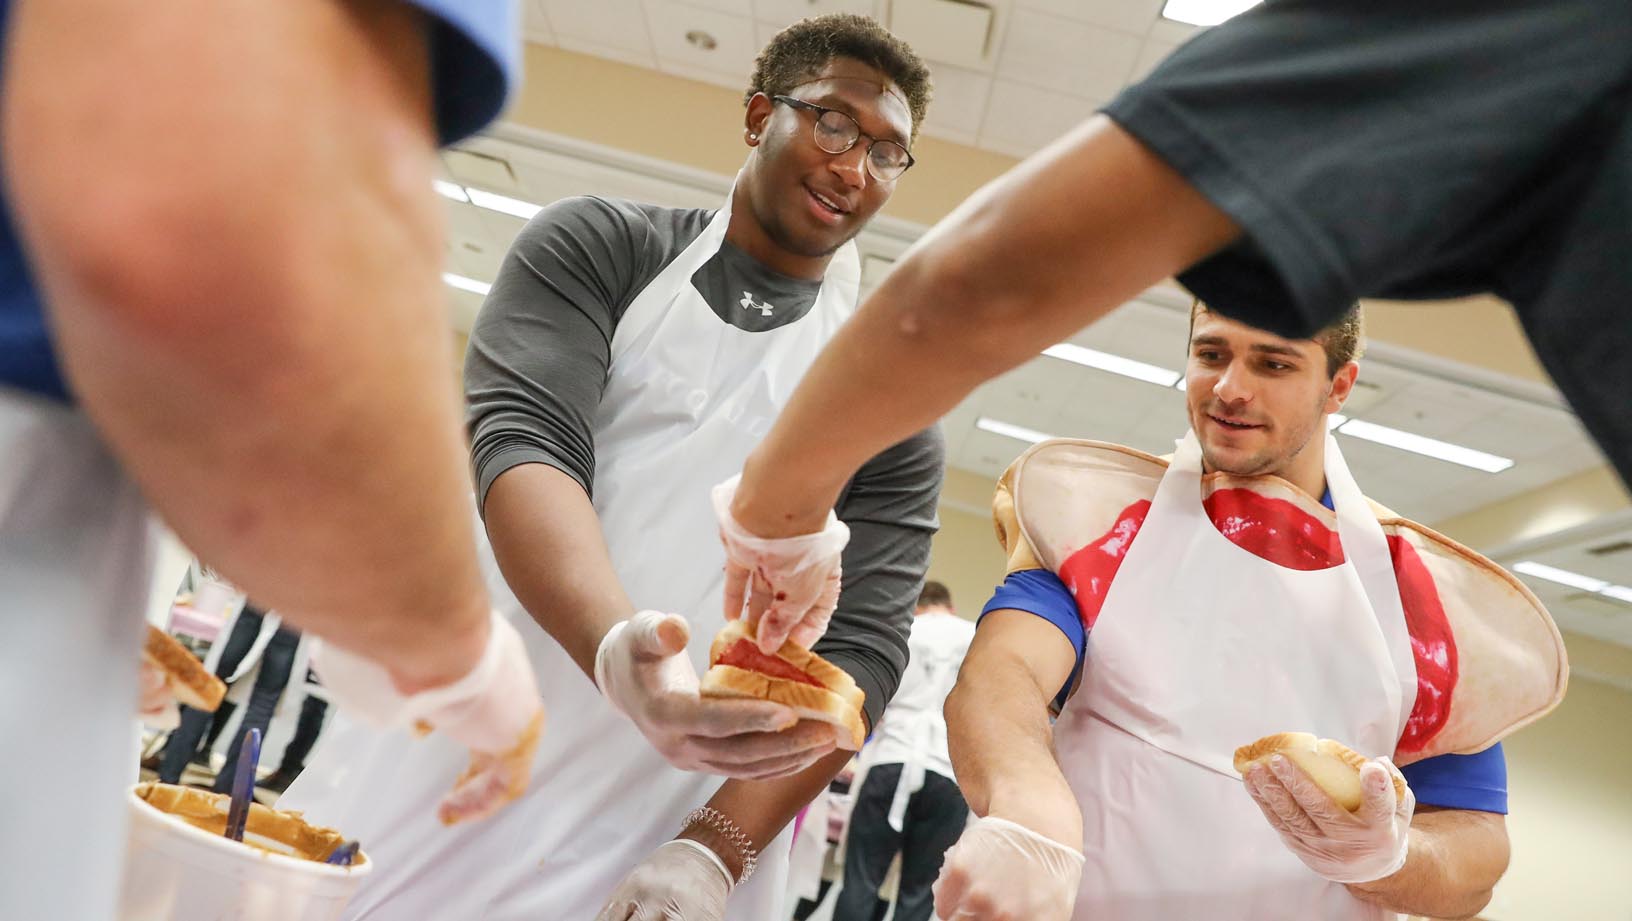 UNK football players Dakarai Monegain-Box, left, and Luke Quinn work with other student-athletes Tuesday during a peanut butter and jelly sandwich drive on campus. UNK Athletics partnered with Sodexo to make and distribute nearly 3,500 sandwiches. (Photos by Corbey R. Dorsey, UNK Communications)